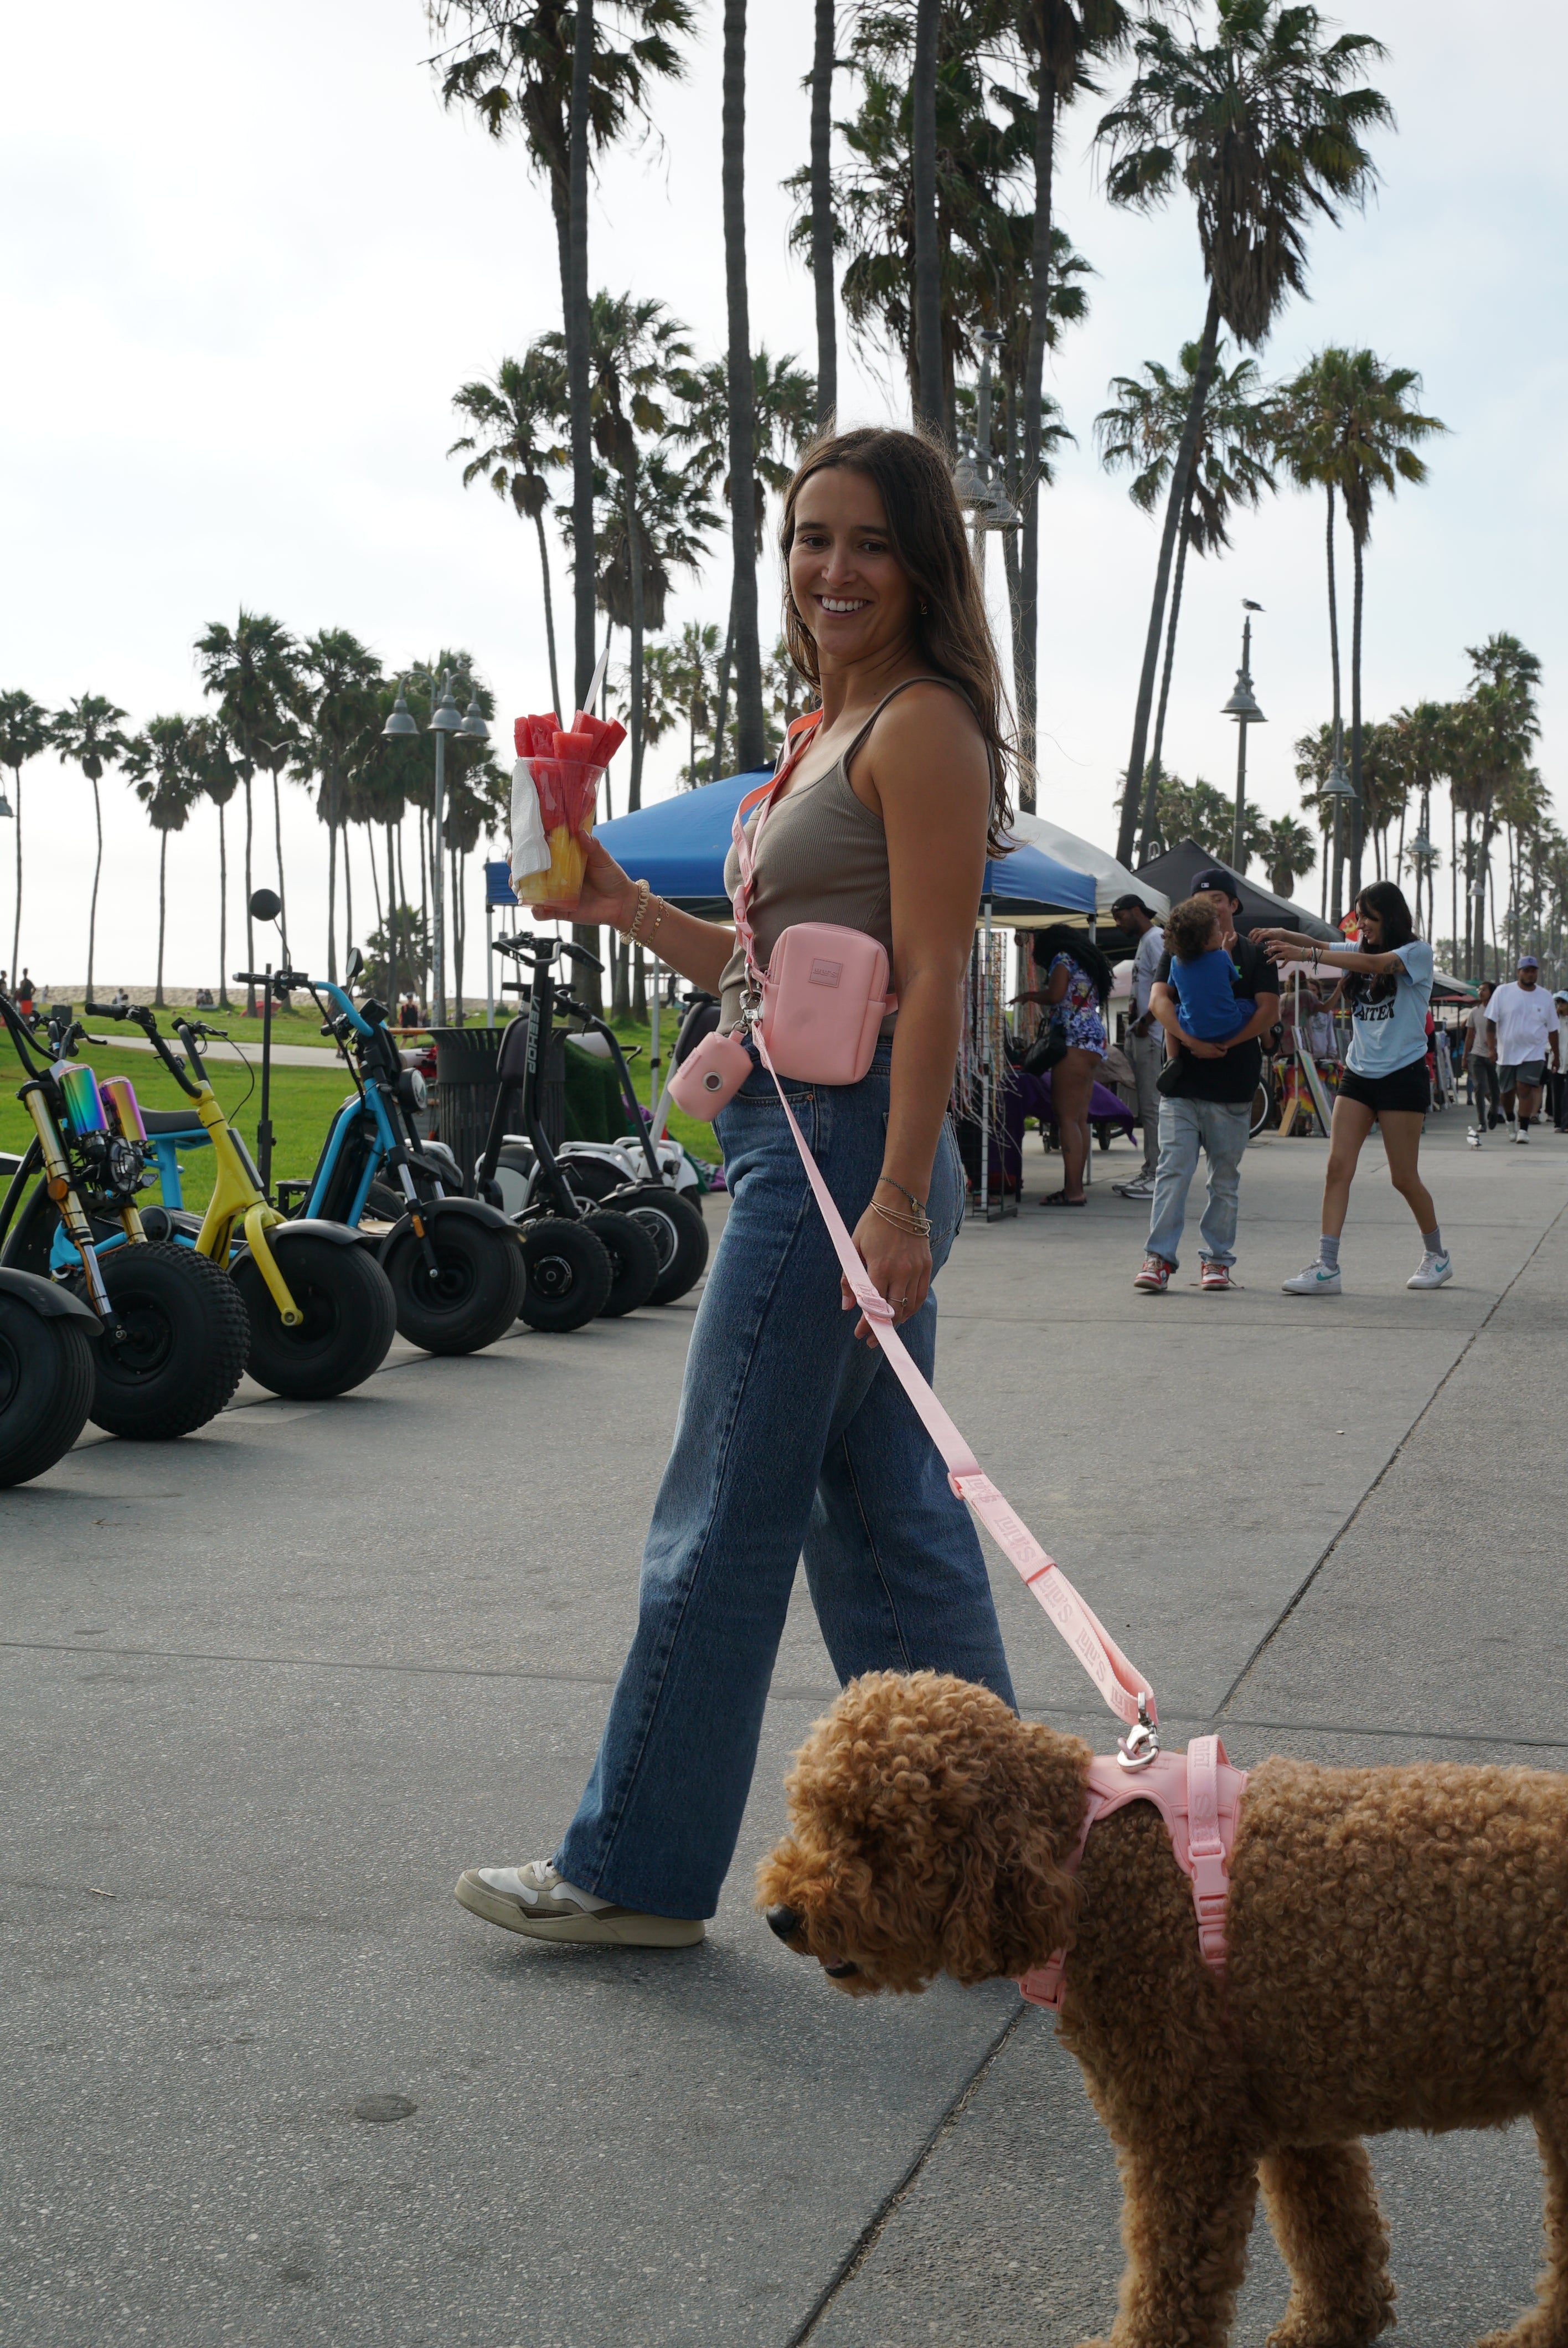  woman walking on a sidewalk in a park, holding a cup of watermelon slices. She is wearing blue jeans, a gray tank top, and a Blush Pink crossbody bag from Lulu's brand. Her fluffy, curly-coated dog, also wearing a Blush Pink harness and leash, walks beside her. The background features palm trees, rental scooters, and people enjoying the park, creating a vibrant and lively atmosphere